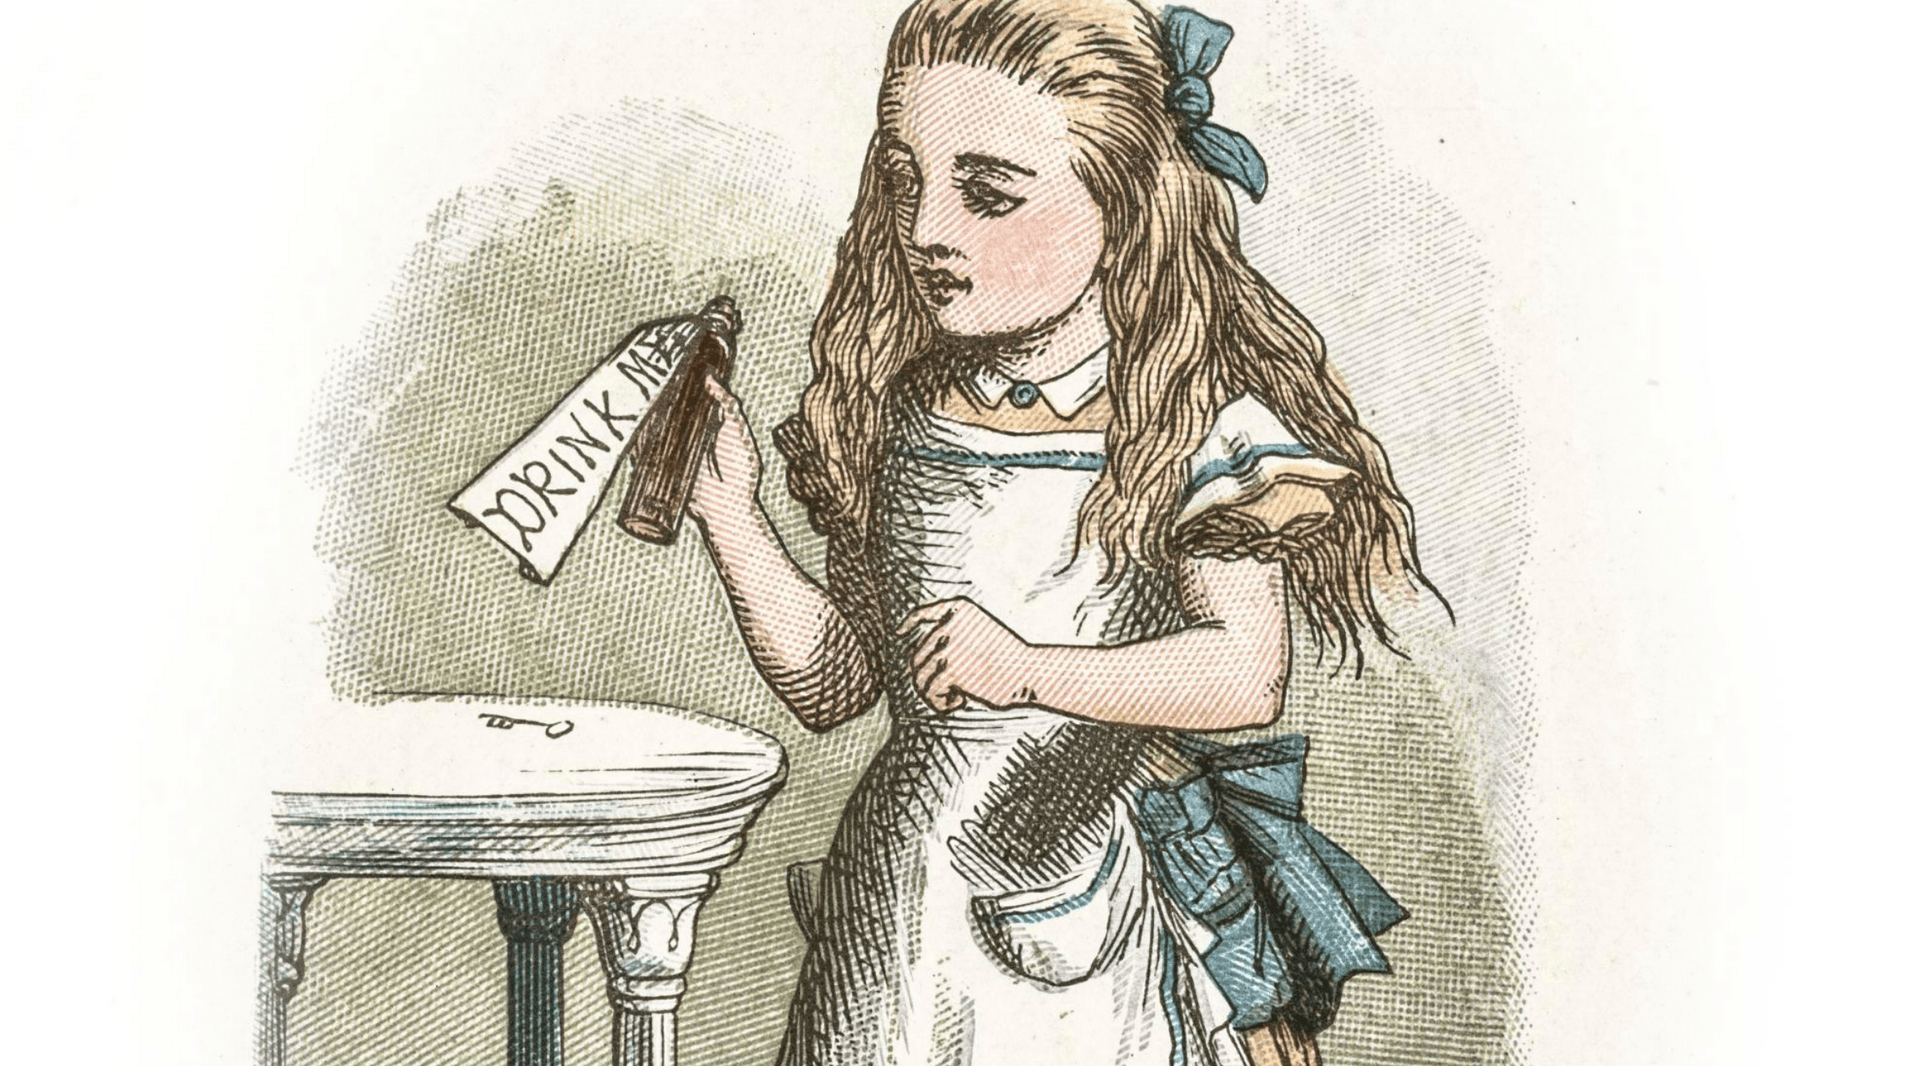 Illustration of blonde girl holding a bottle with a tag that reads "Drink me"